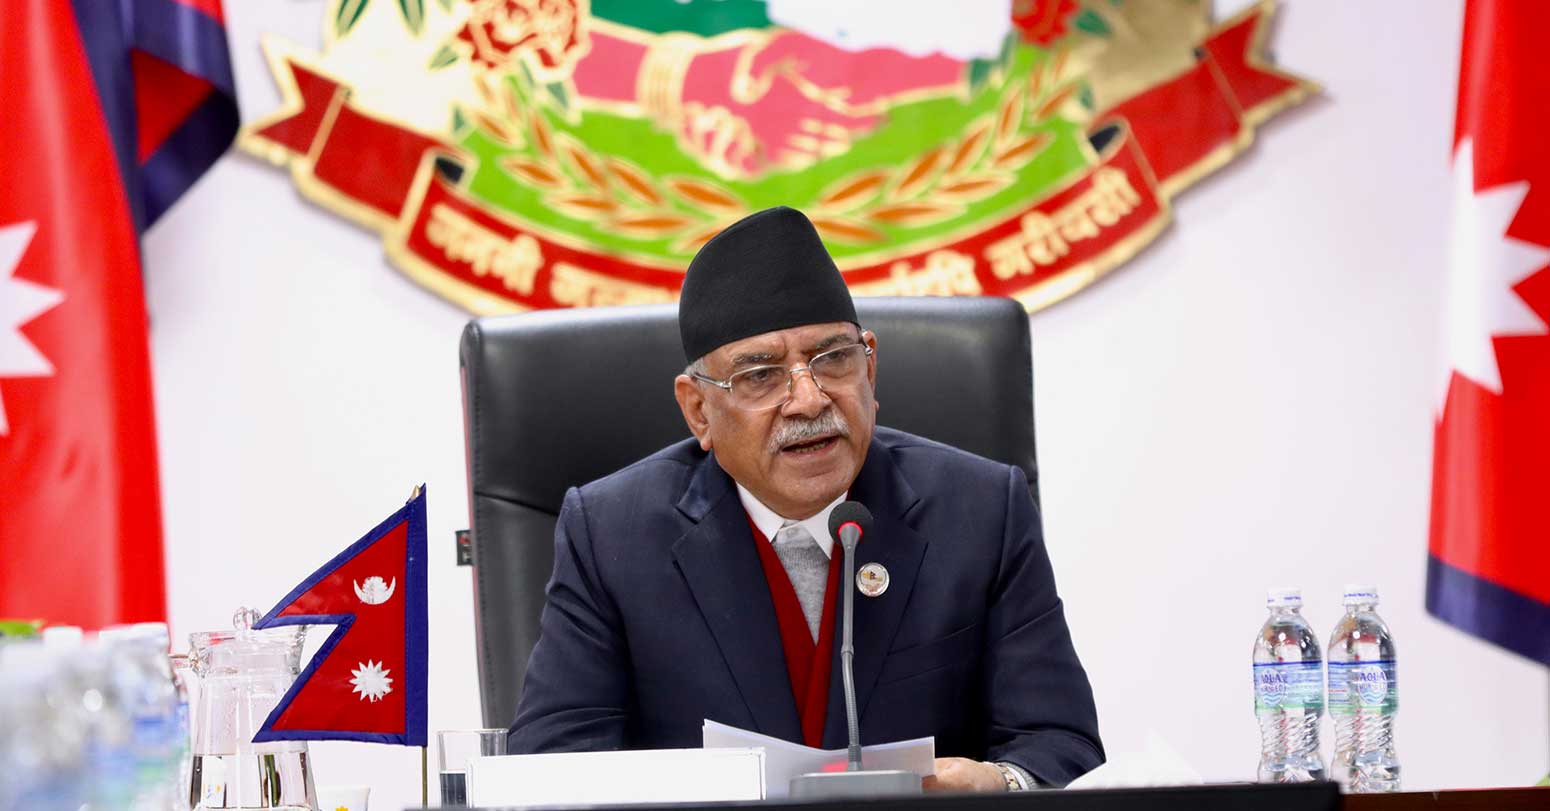 Prime Minister Dahal flying to India